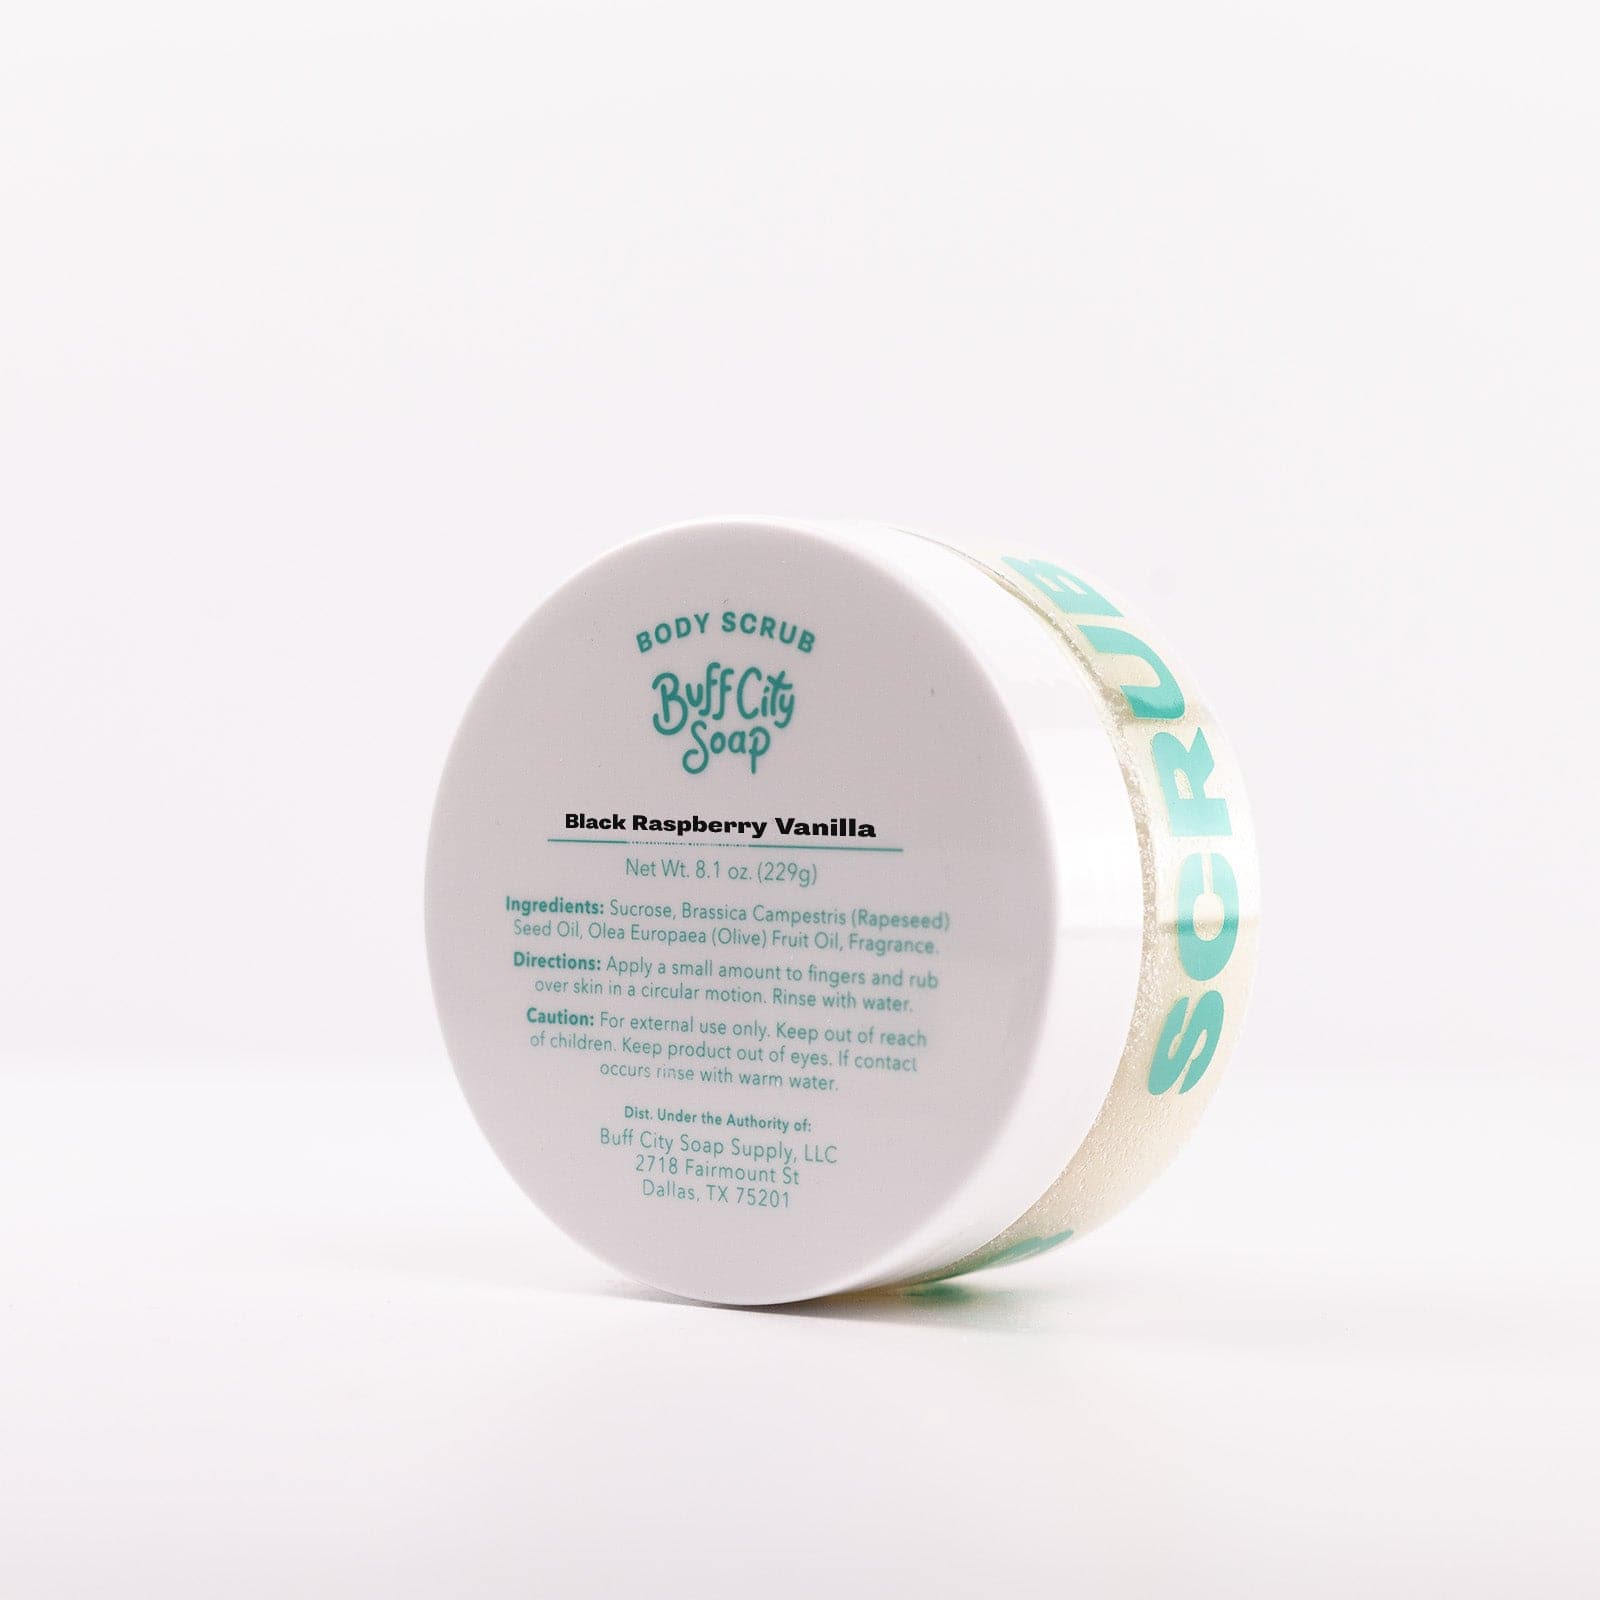 Body Scrub container with white lid and teal lettering on side against white background